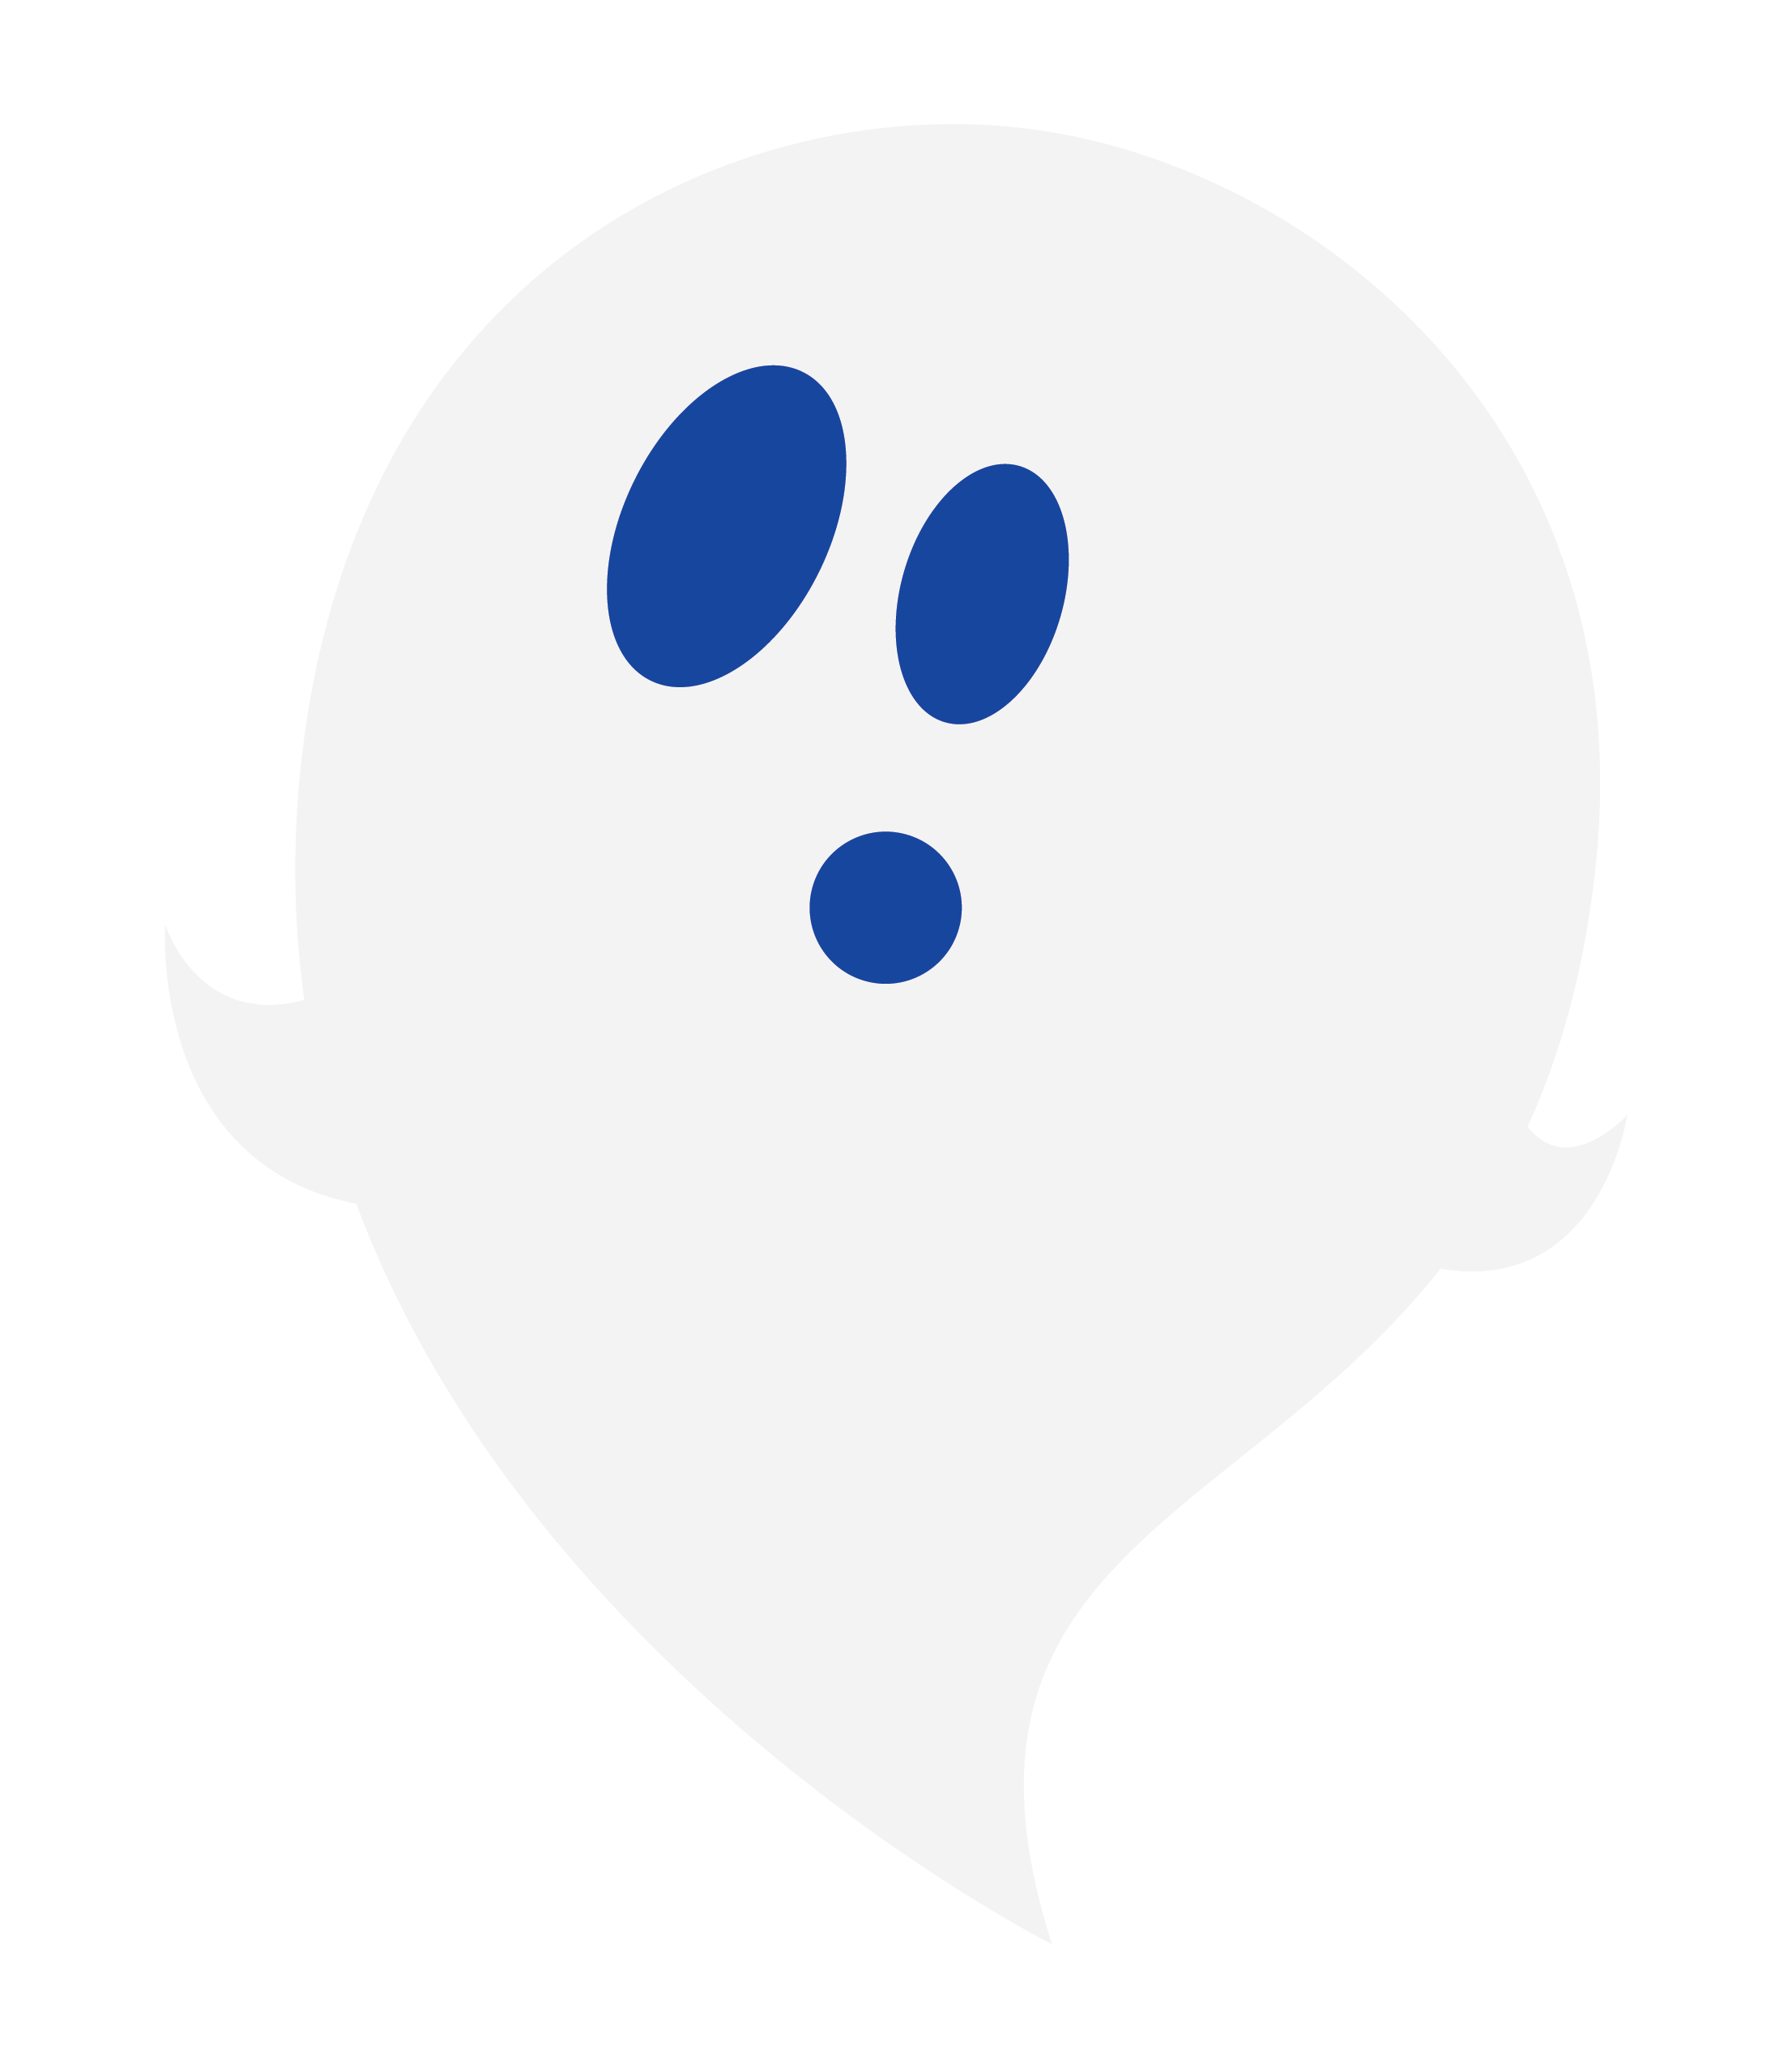 ghost 10.png__PID:9c1d4647-1c29-46c6-a2d4-c16a9898b218